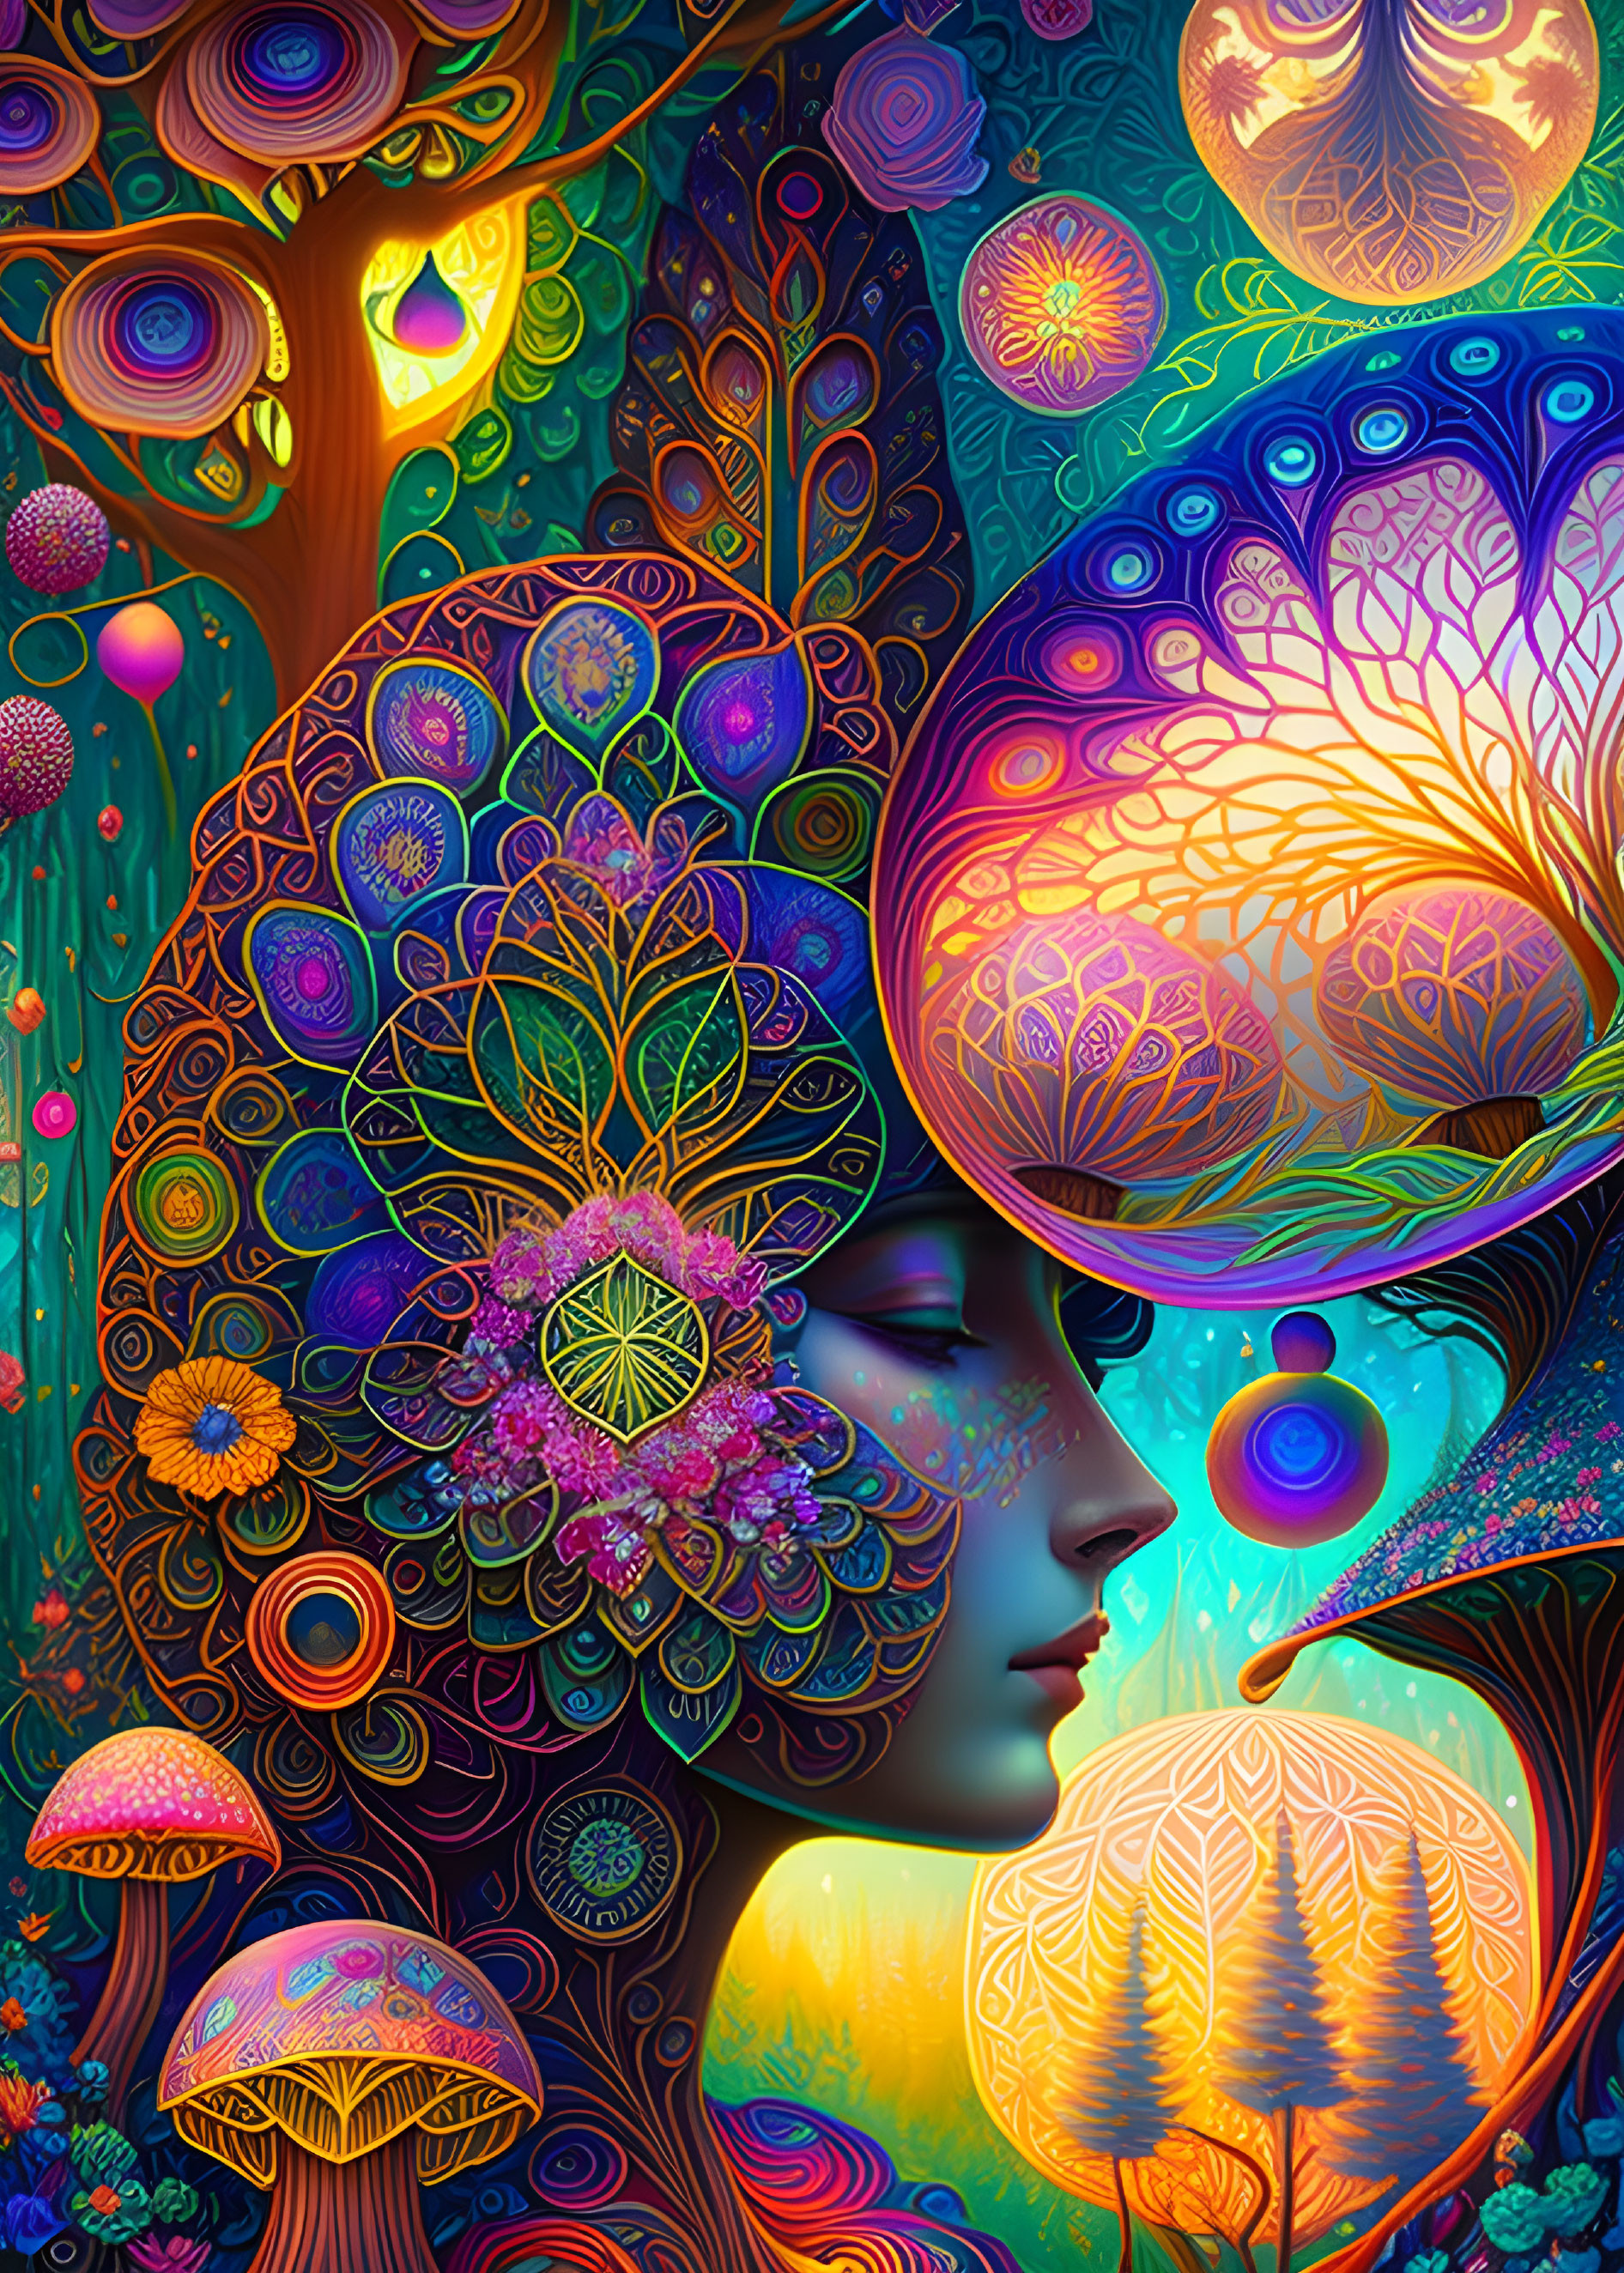 Psychedelic dream 